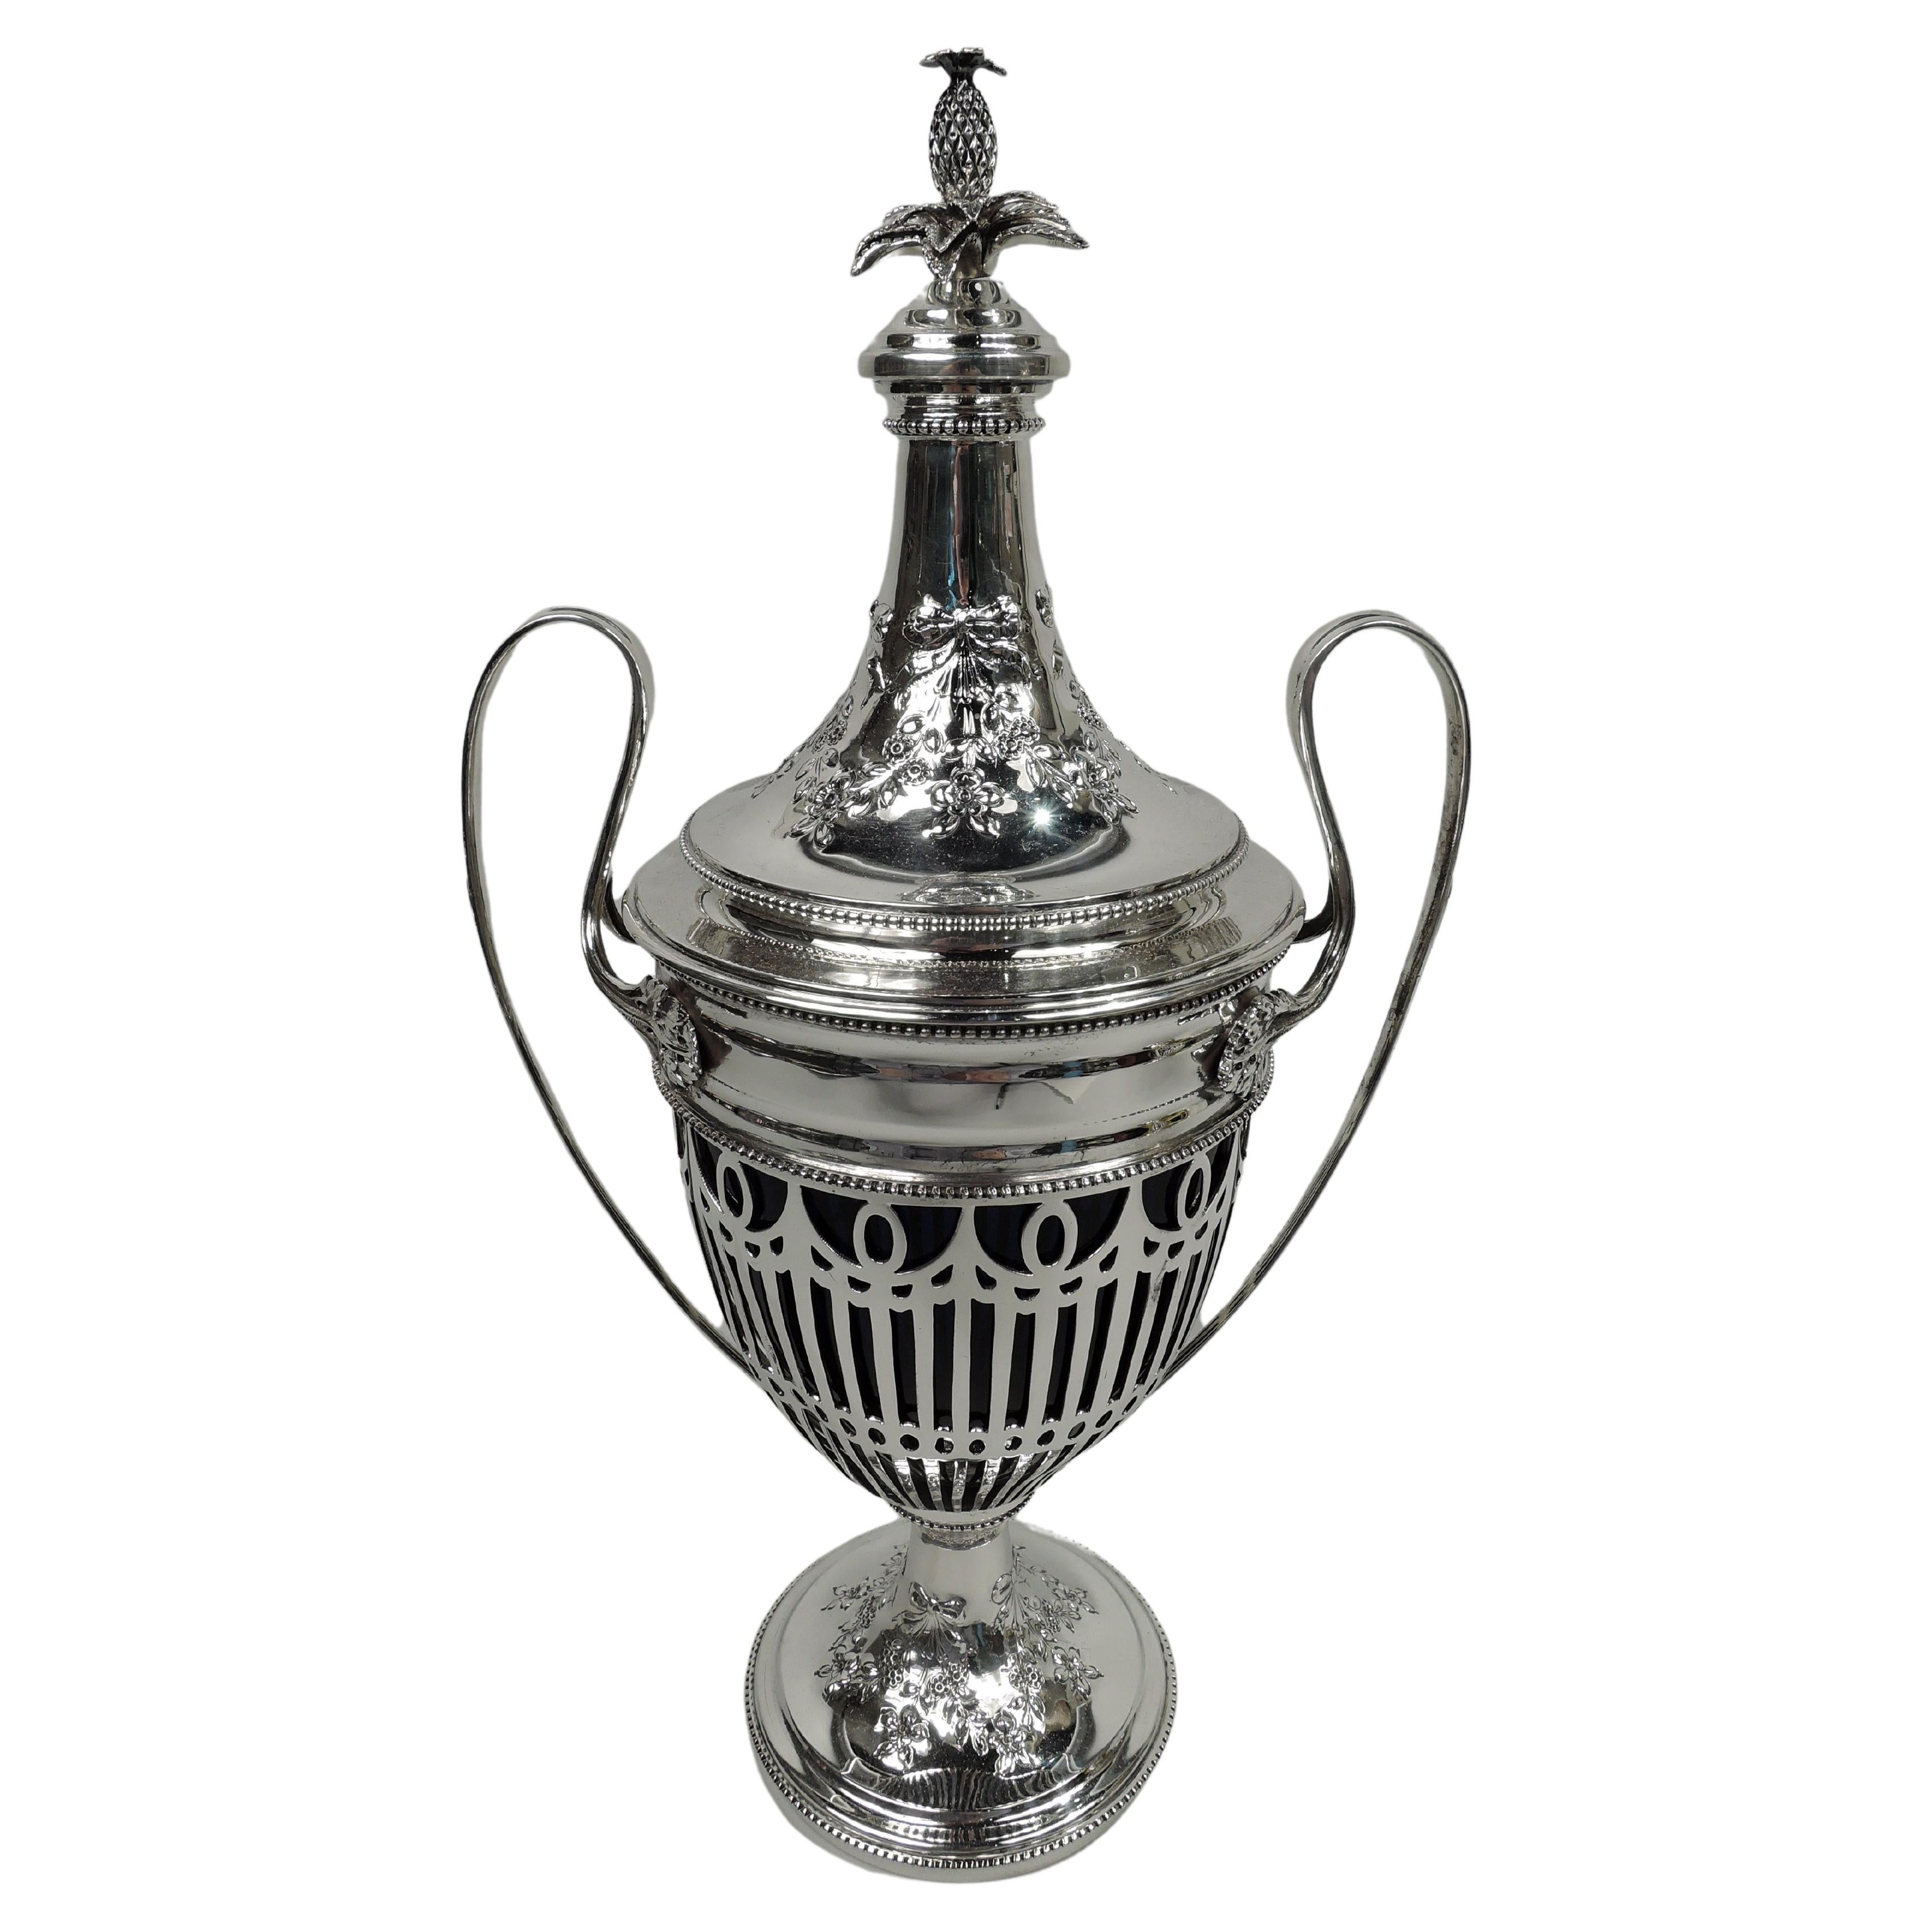 Antique Howard Edwardian Neoclassical Sterling Silver Covered Urn